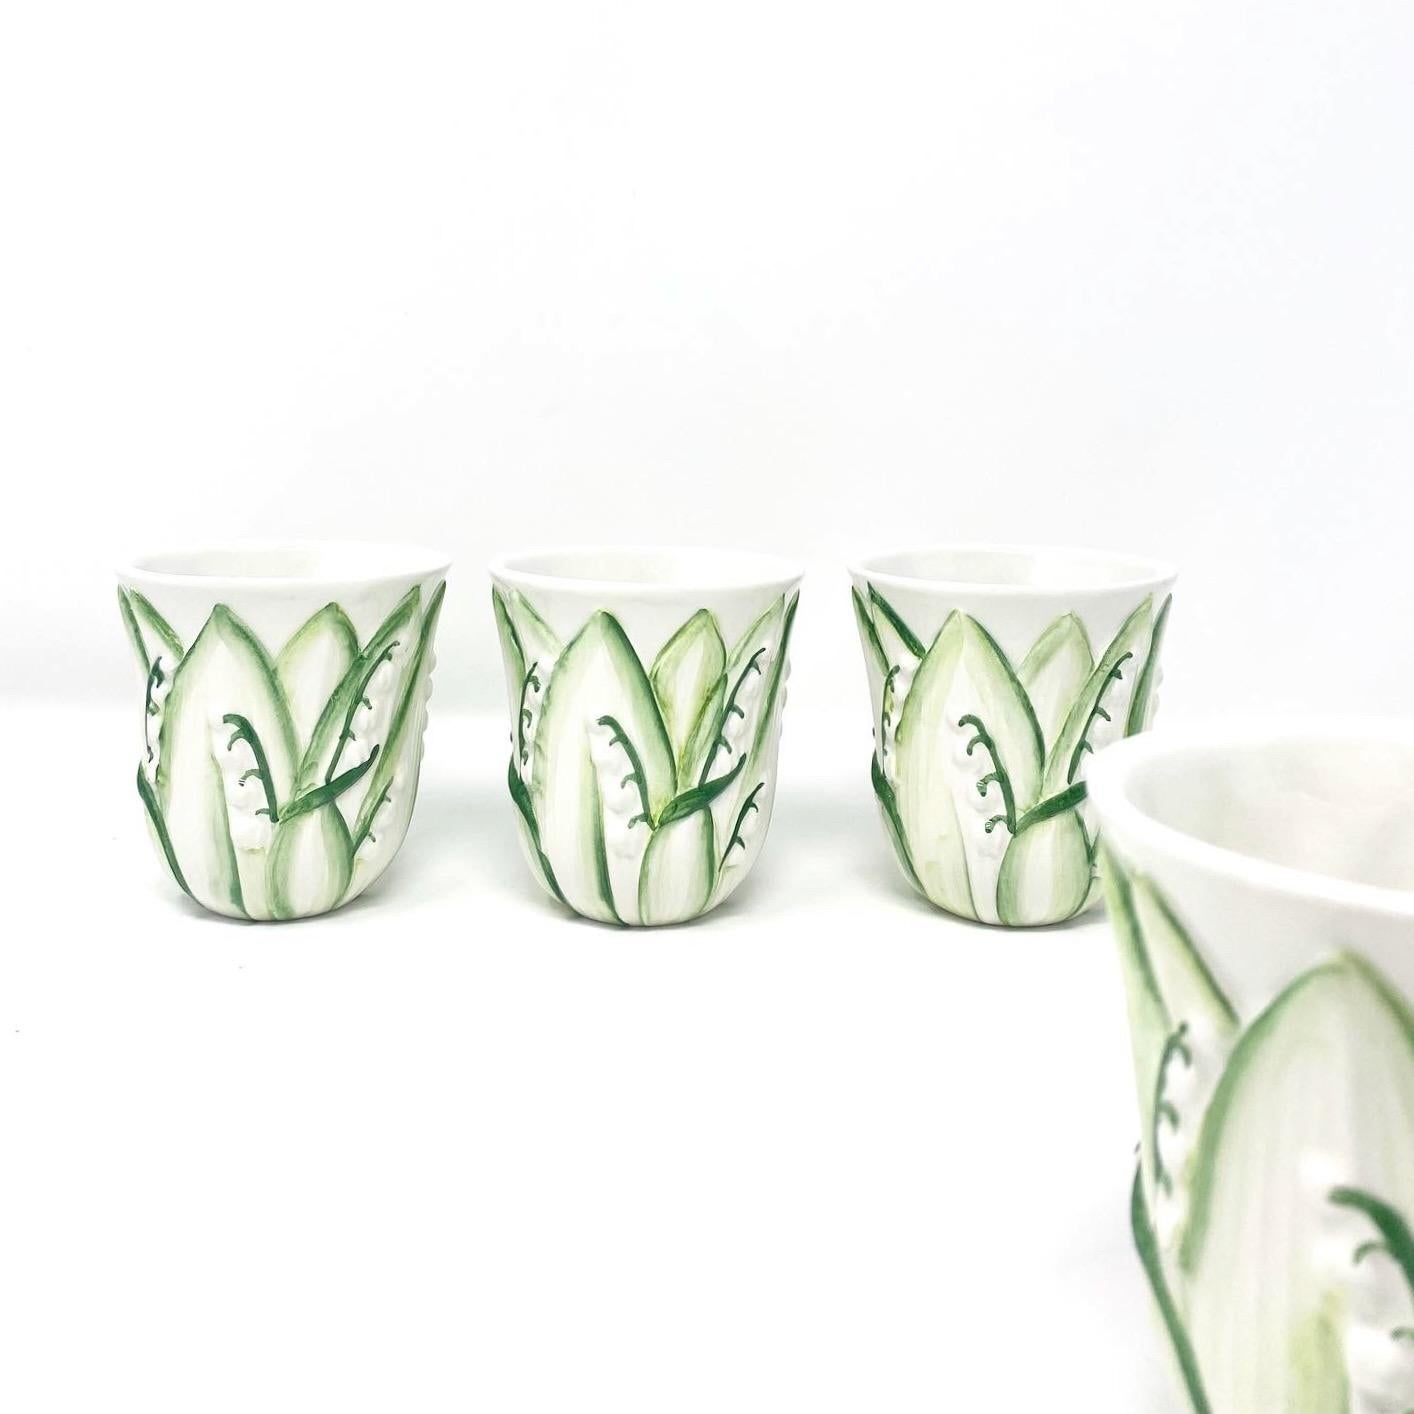 Majolica Lily of the Valley Tumbler, Set of 4, Handmade in Italy for The Mane Lion

The Mane Lion was born in 1979 in the heart of Philadelphia's fabled Main Line, offering a line of charming, hand-painted chip-and-dip serving pieces that enhanced